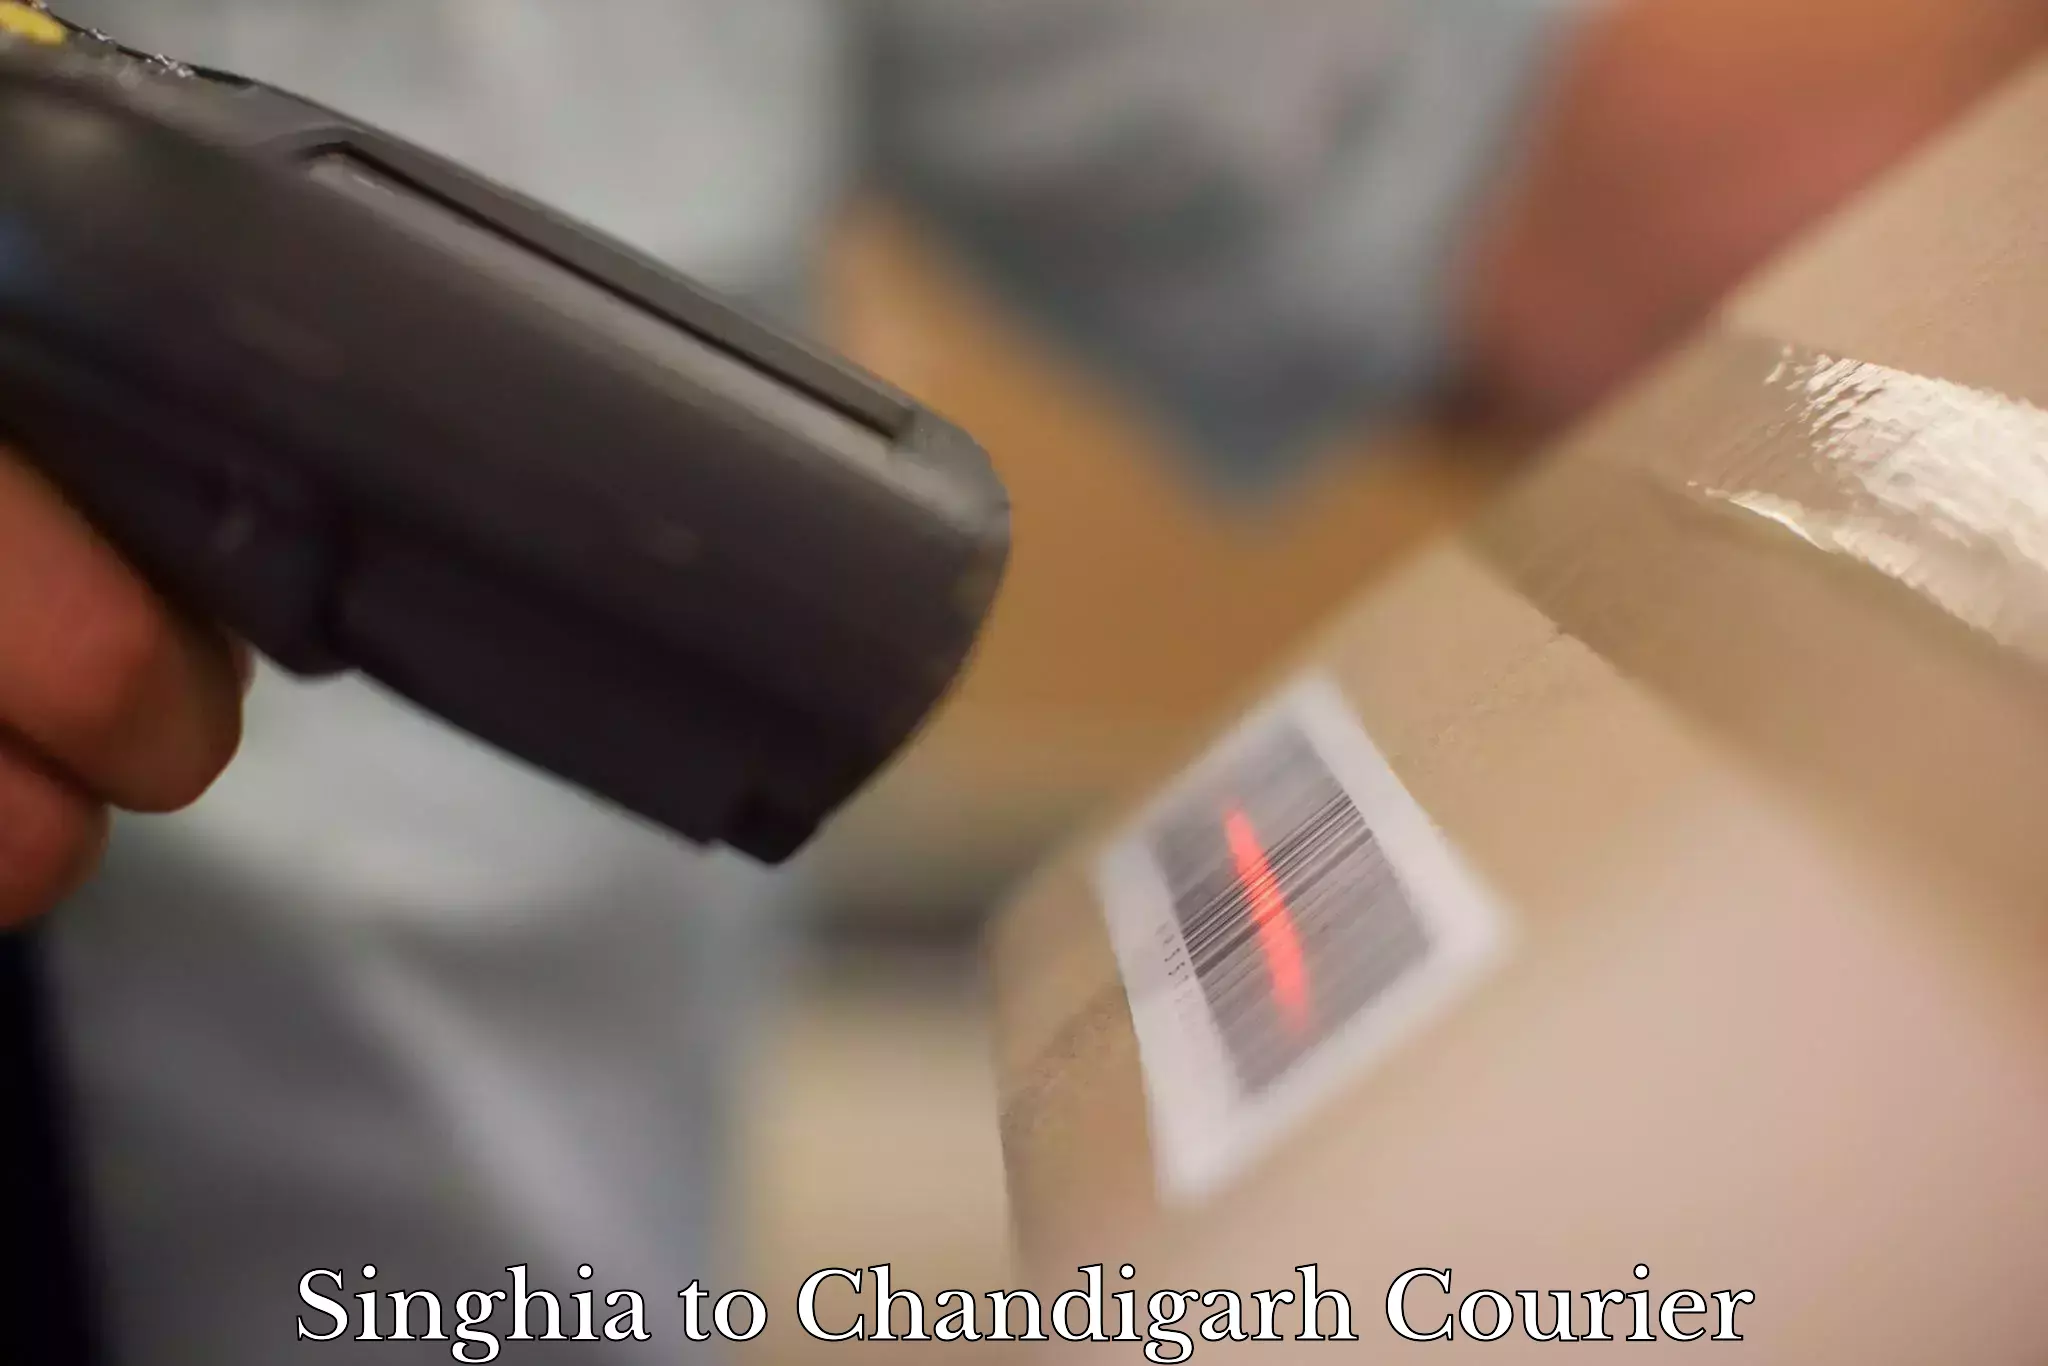 Furniture moving assistance Singhia to Chandigarh